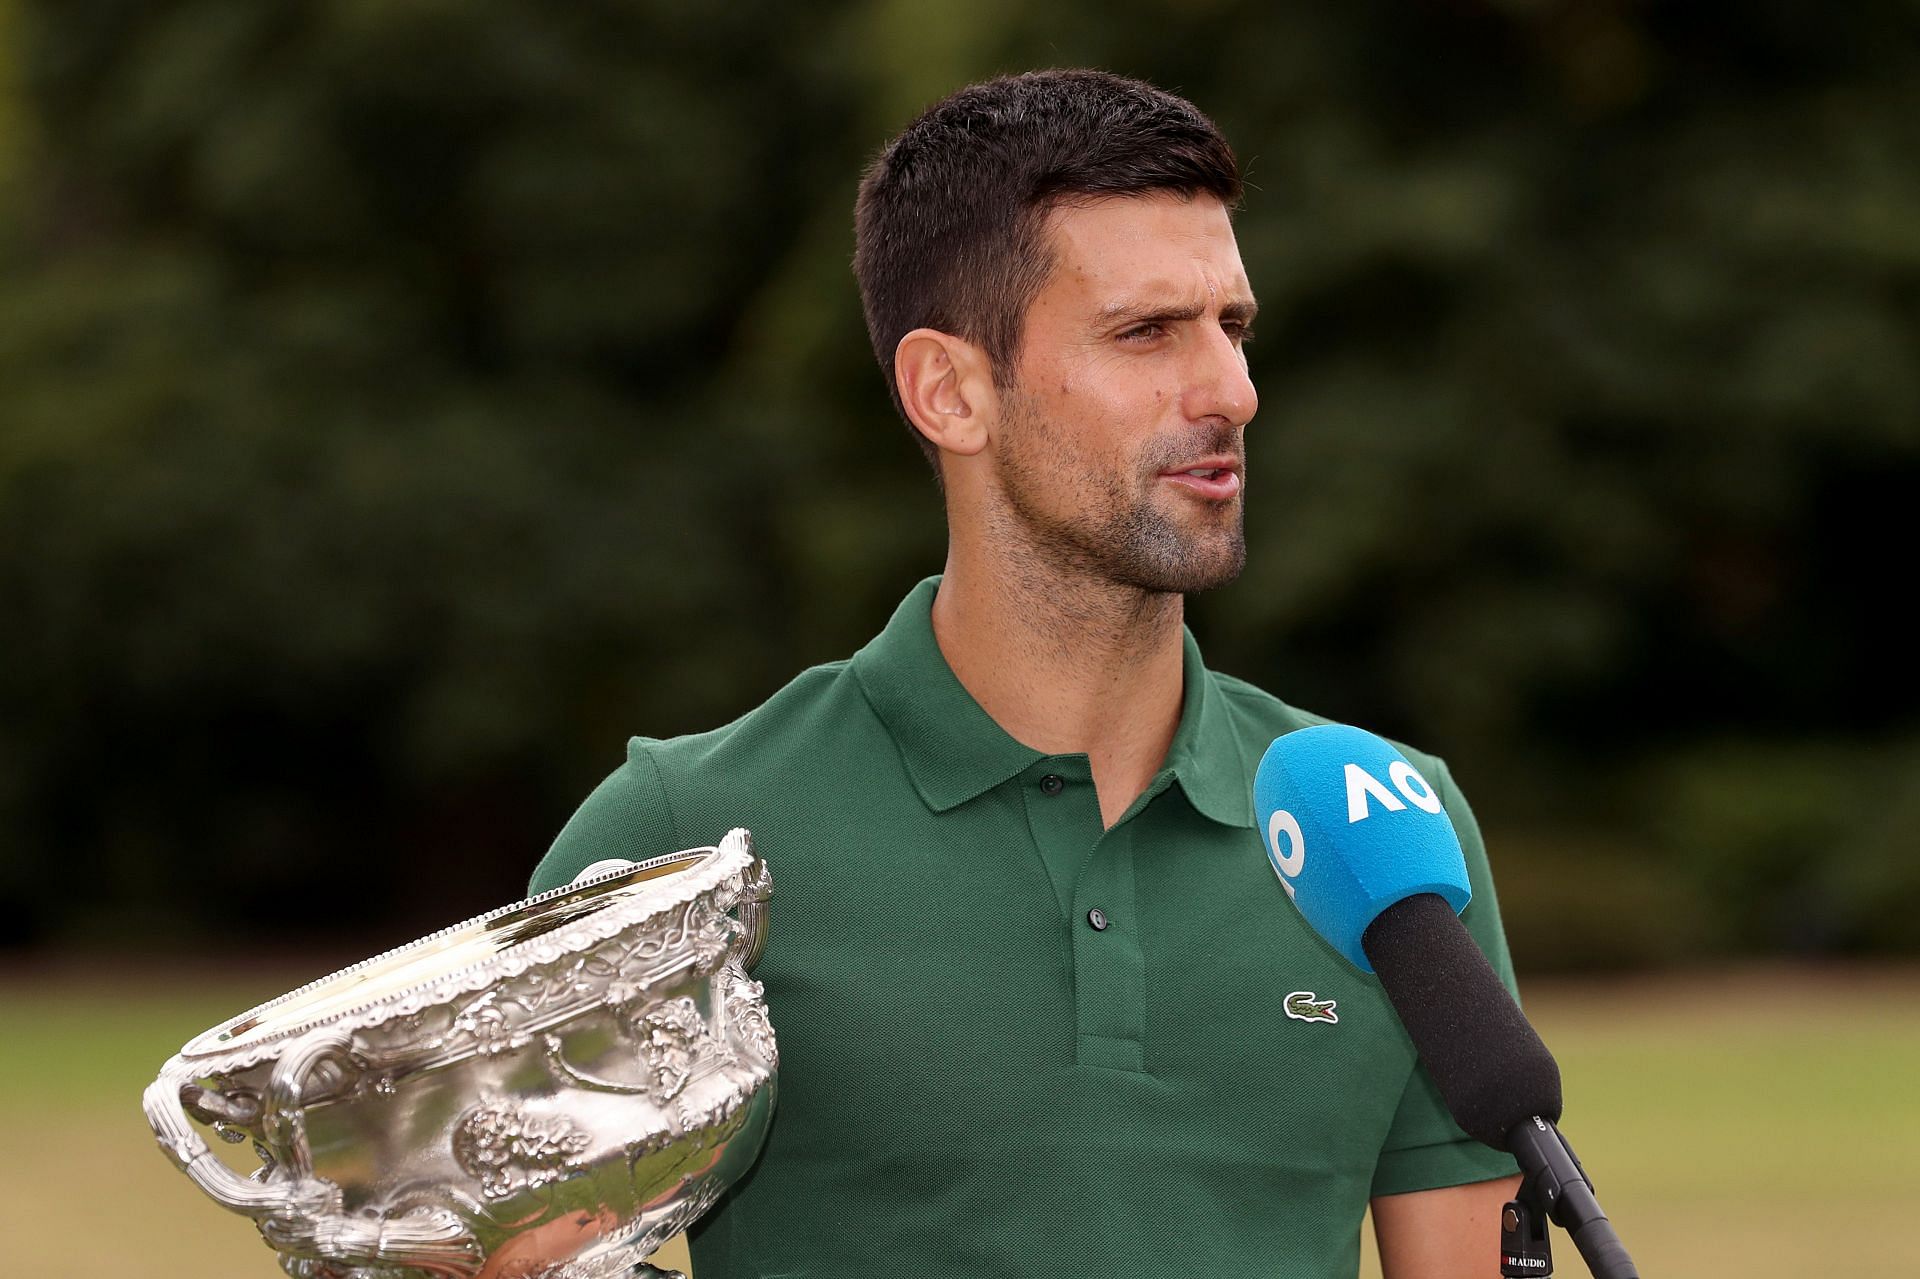 Novak Djokovic speaks with the media while holding the Norman Brookes Challenge Cup